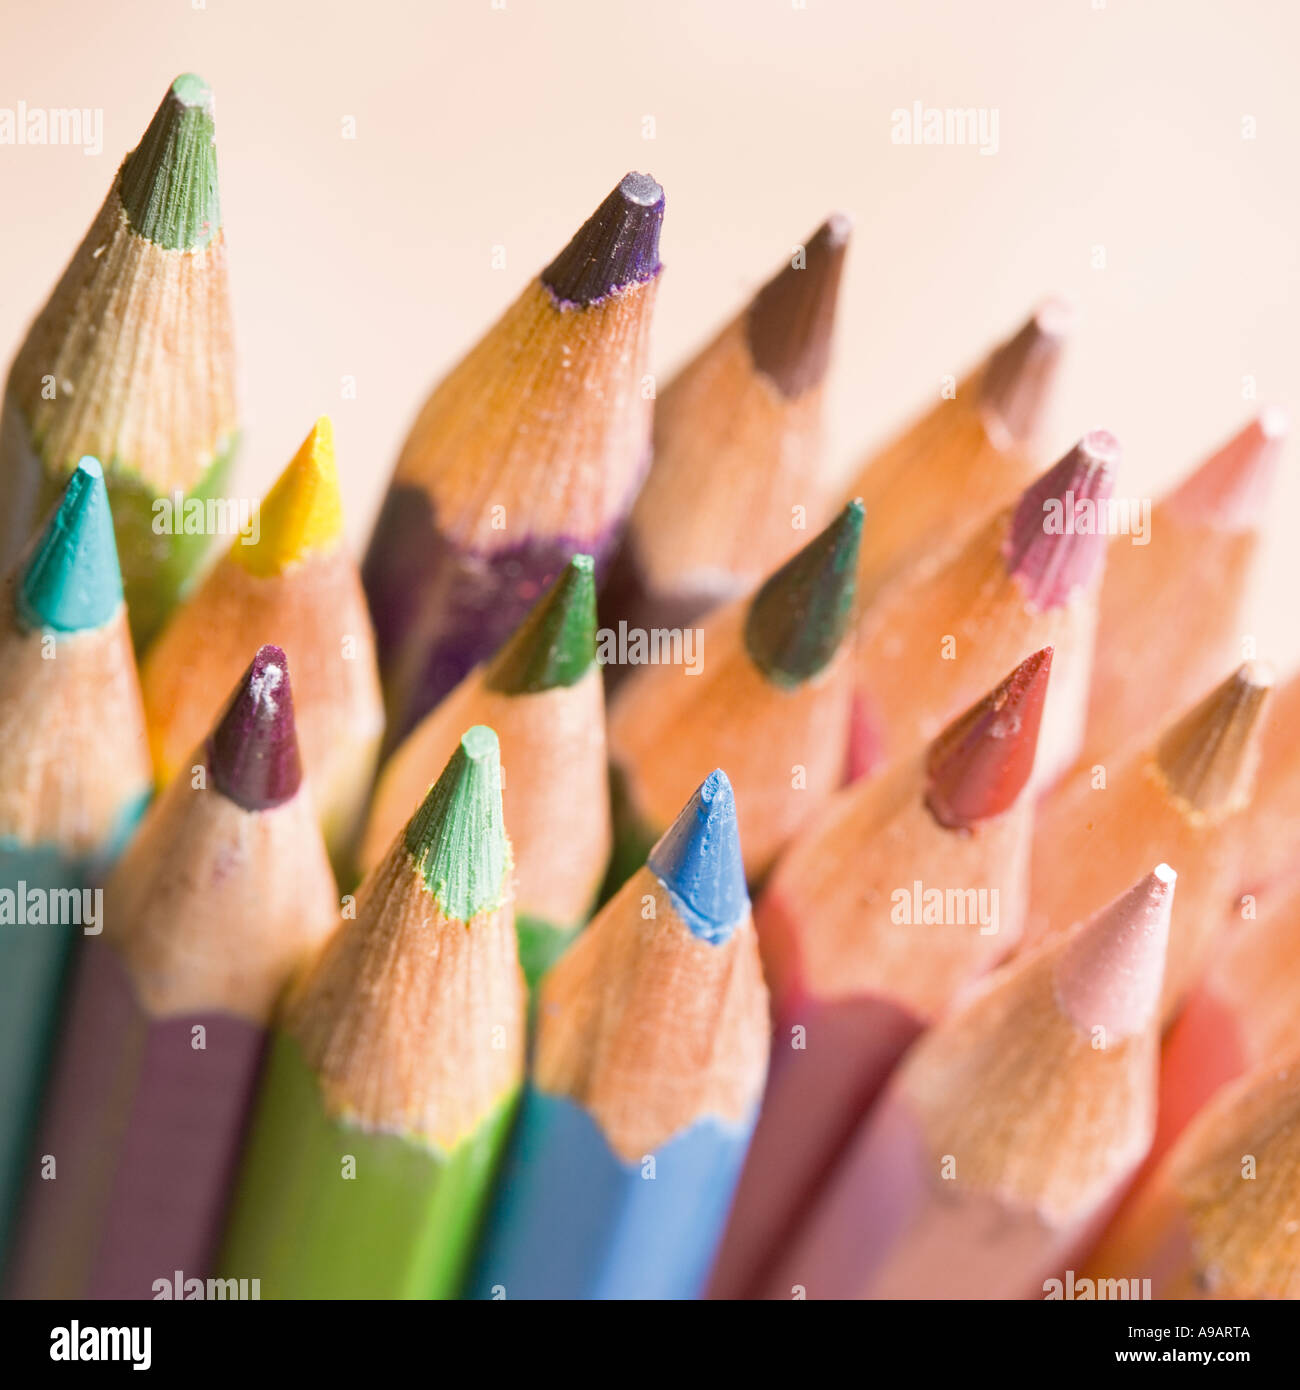 Group of coloured pencils Stock Photo